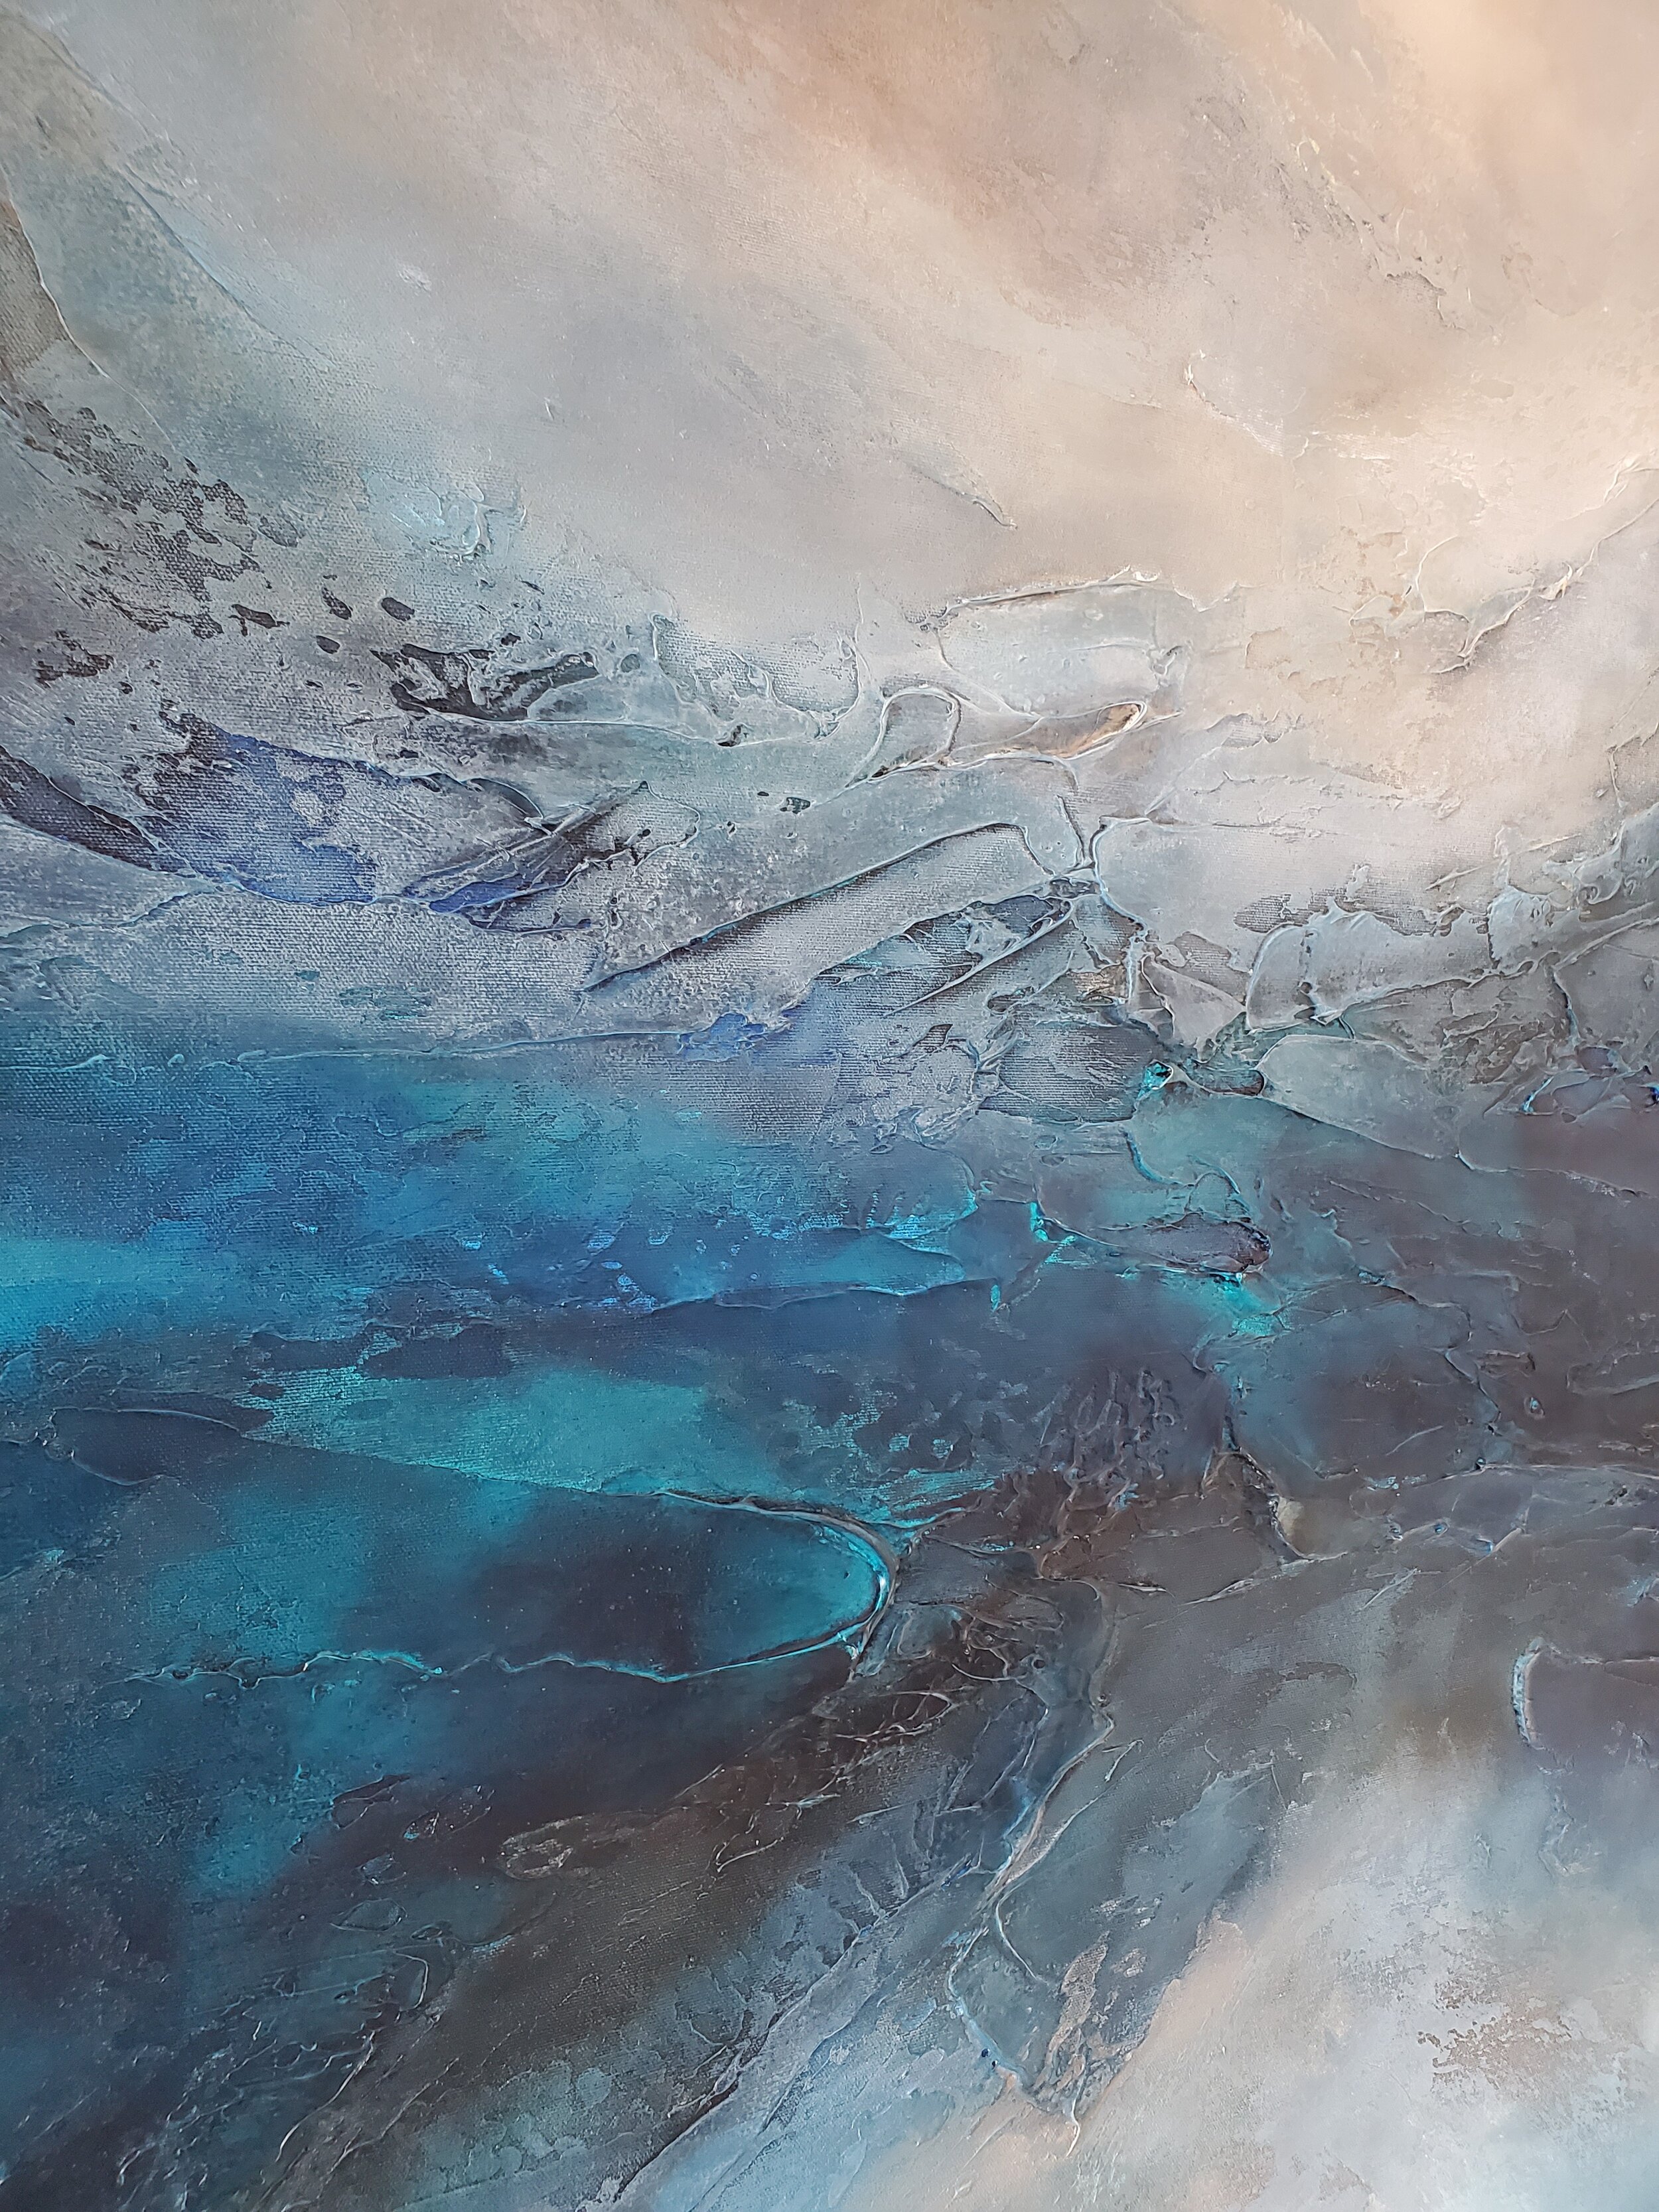  Painting #4 Surrender - Vancouver abstract painter, Donna Giraud has eleven new available artworks for sale in her 2020 solo art exhibition titled, Lost and Found. Her large scale, abstract, textural artworks are perfect for any interior design aest